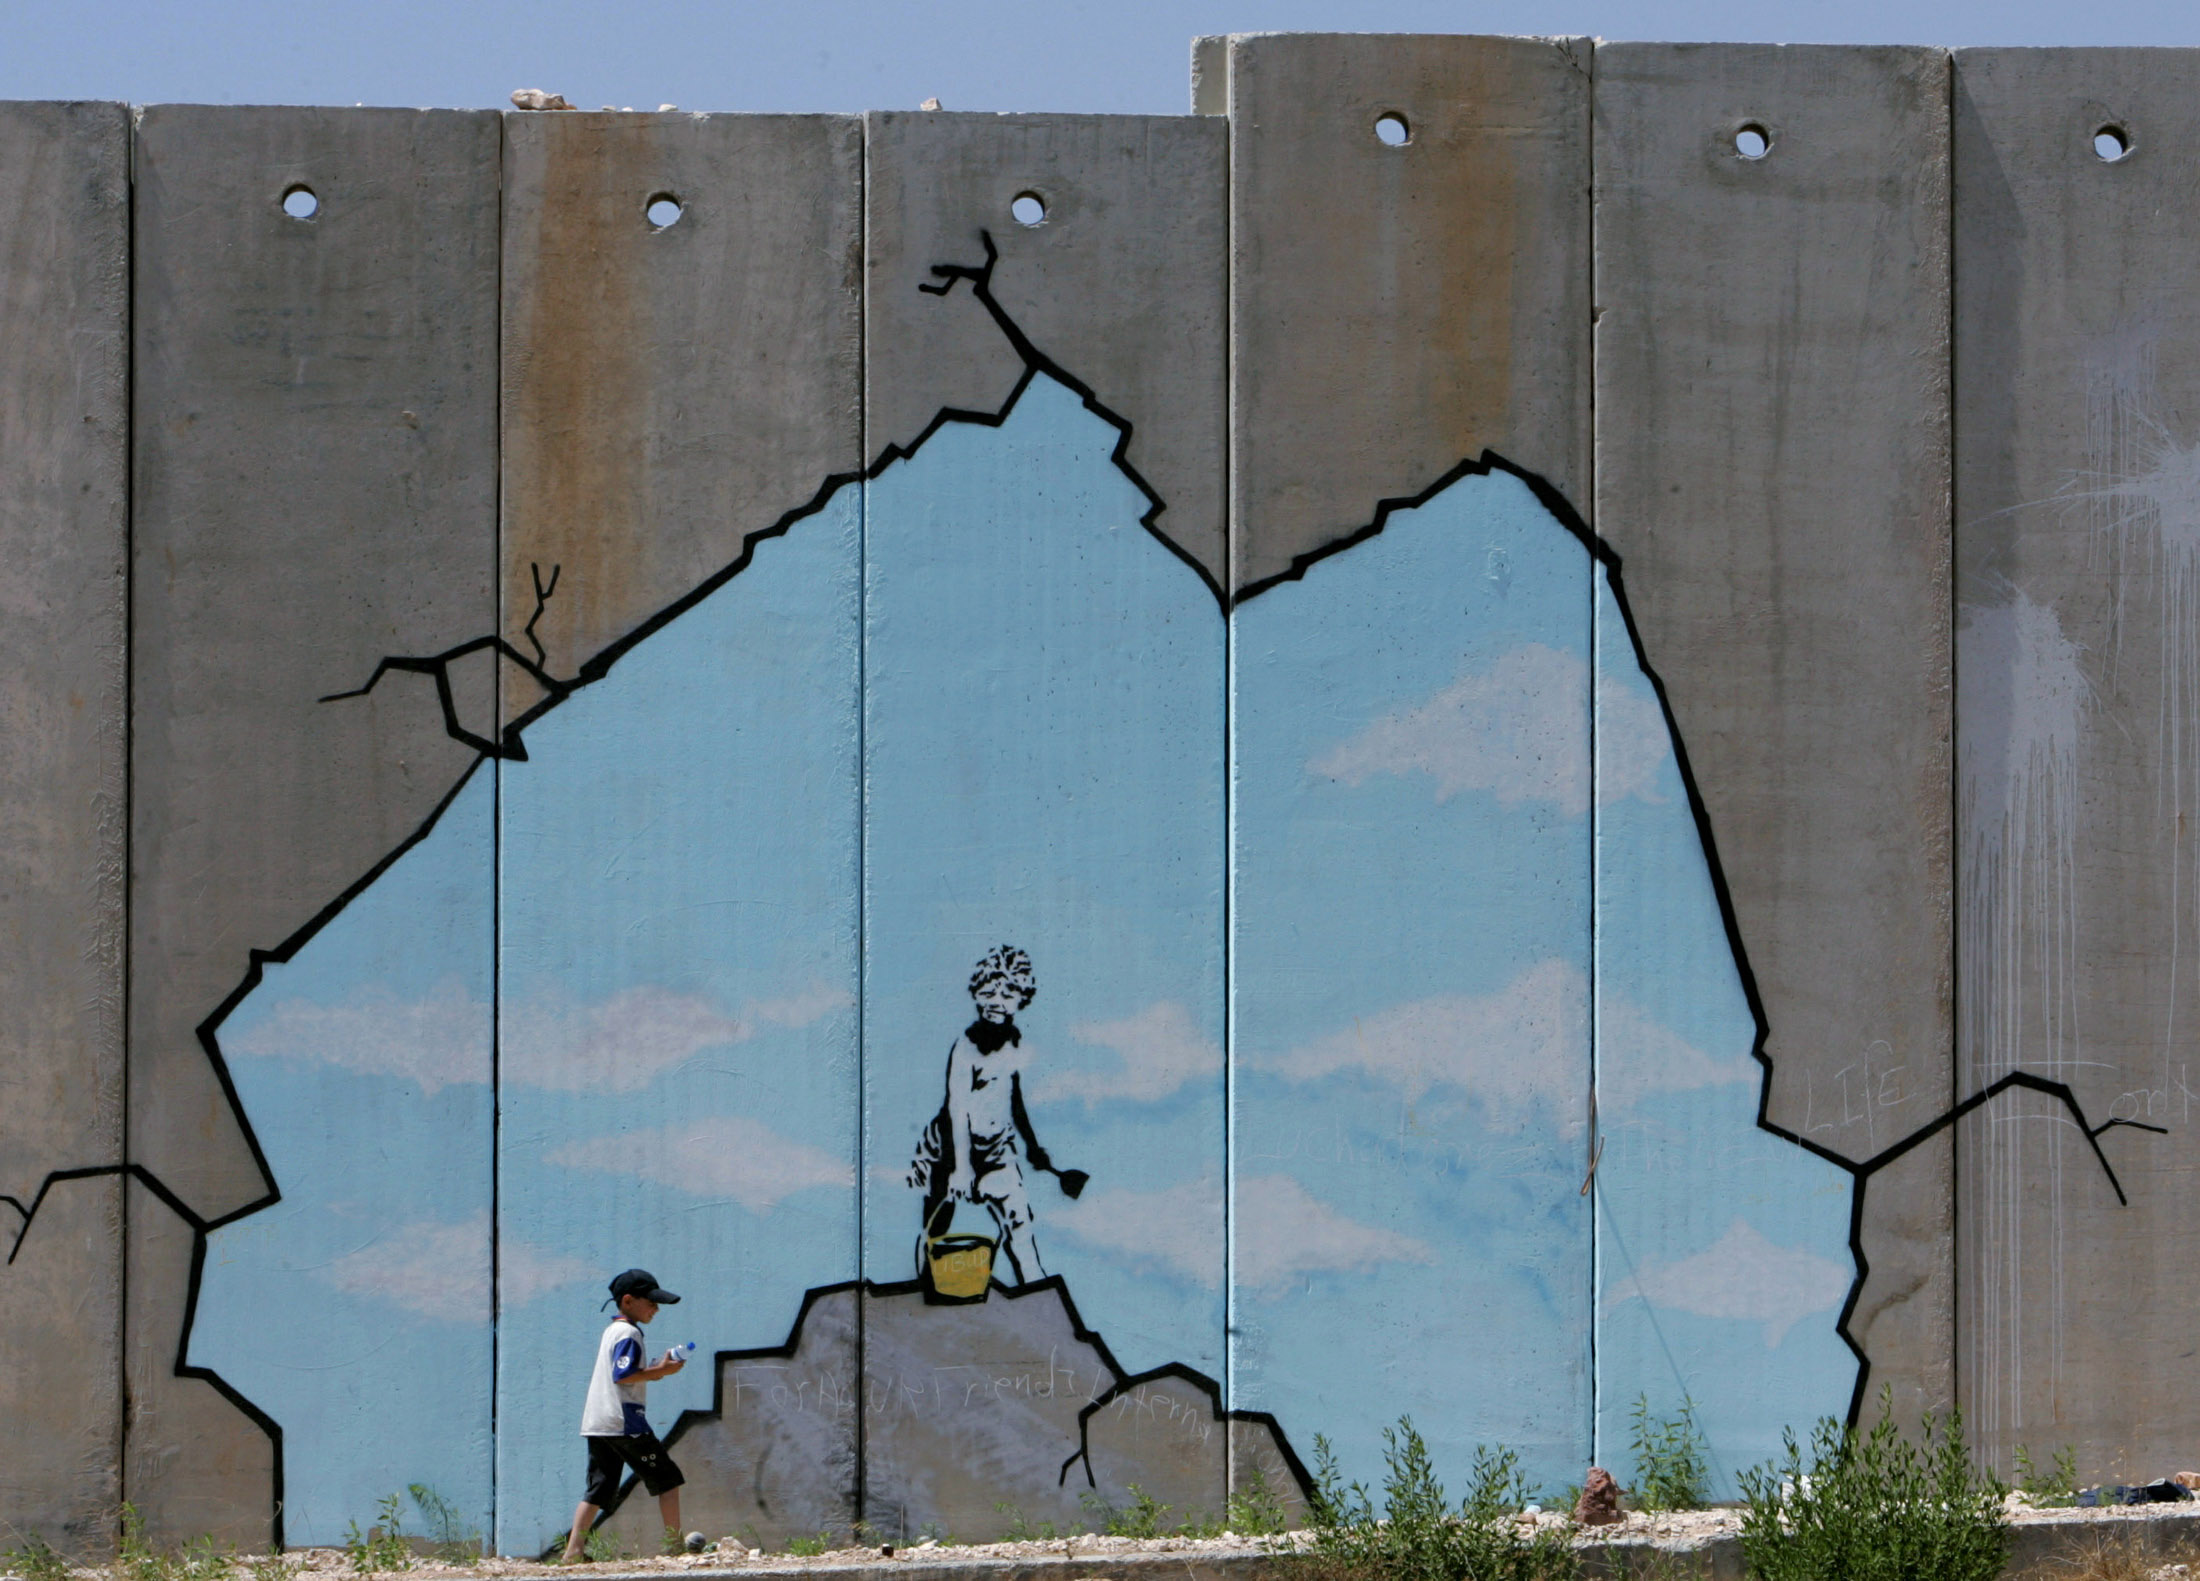 A Palestinian boy walks past a drawing by British graffiti artist Banksy, along part of the controversial Israeli barrier near the Kalandia checkpoint in the West Bank August 10, 2005. Photo by Ammar Awad/REUTERS.